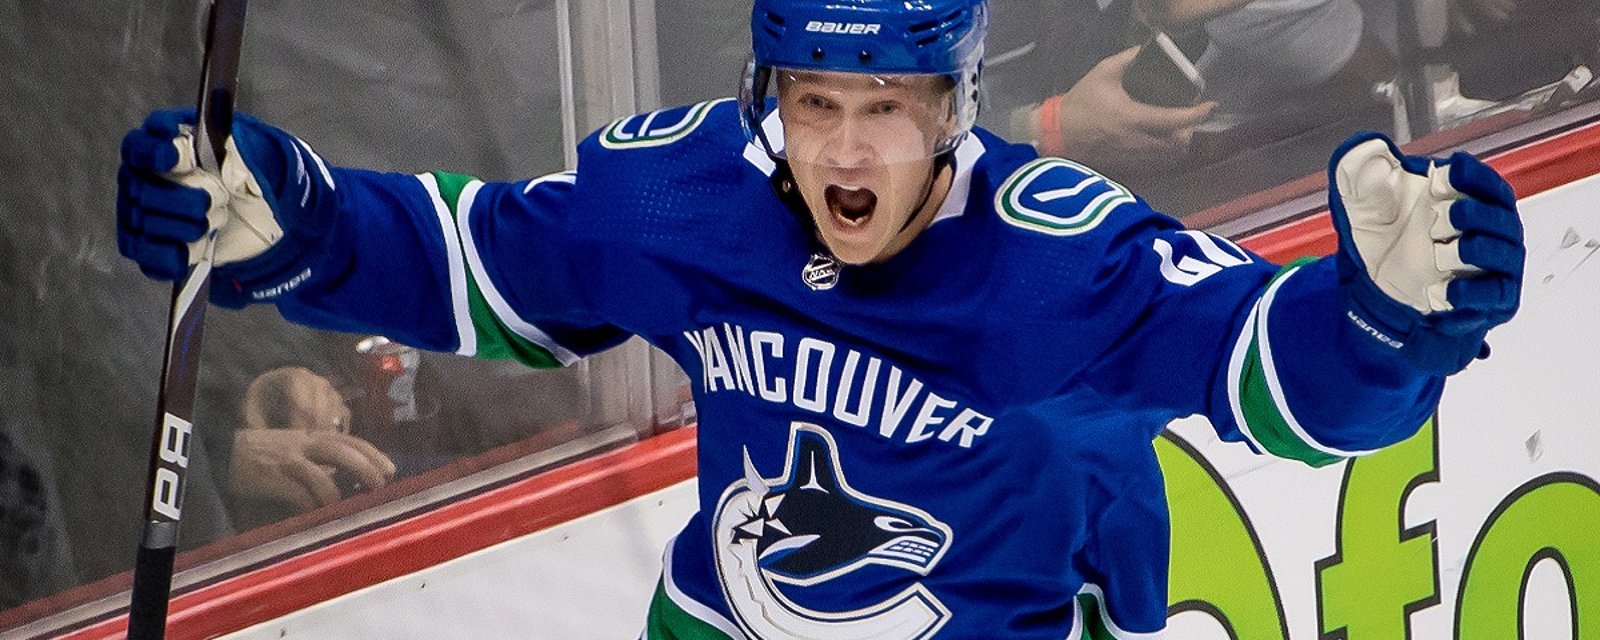 Elias Pettersson humbled by comments from the Great One.